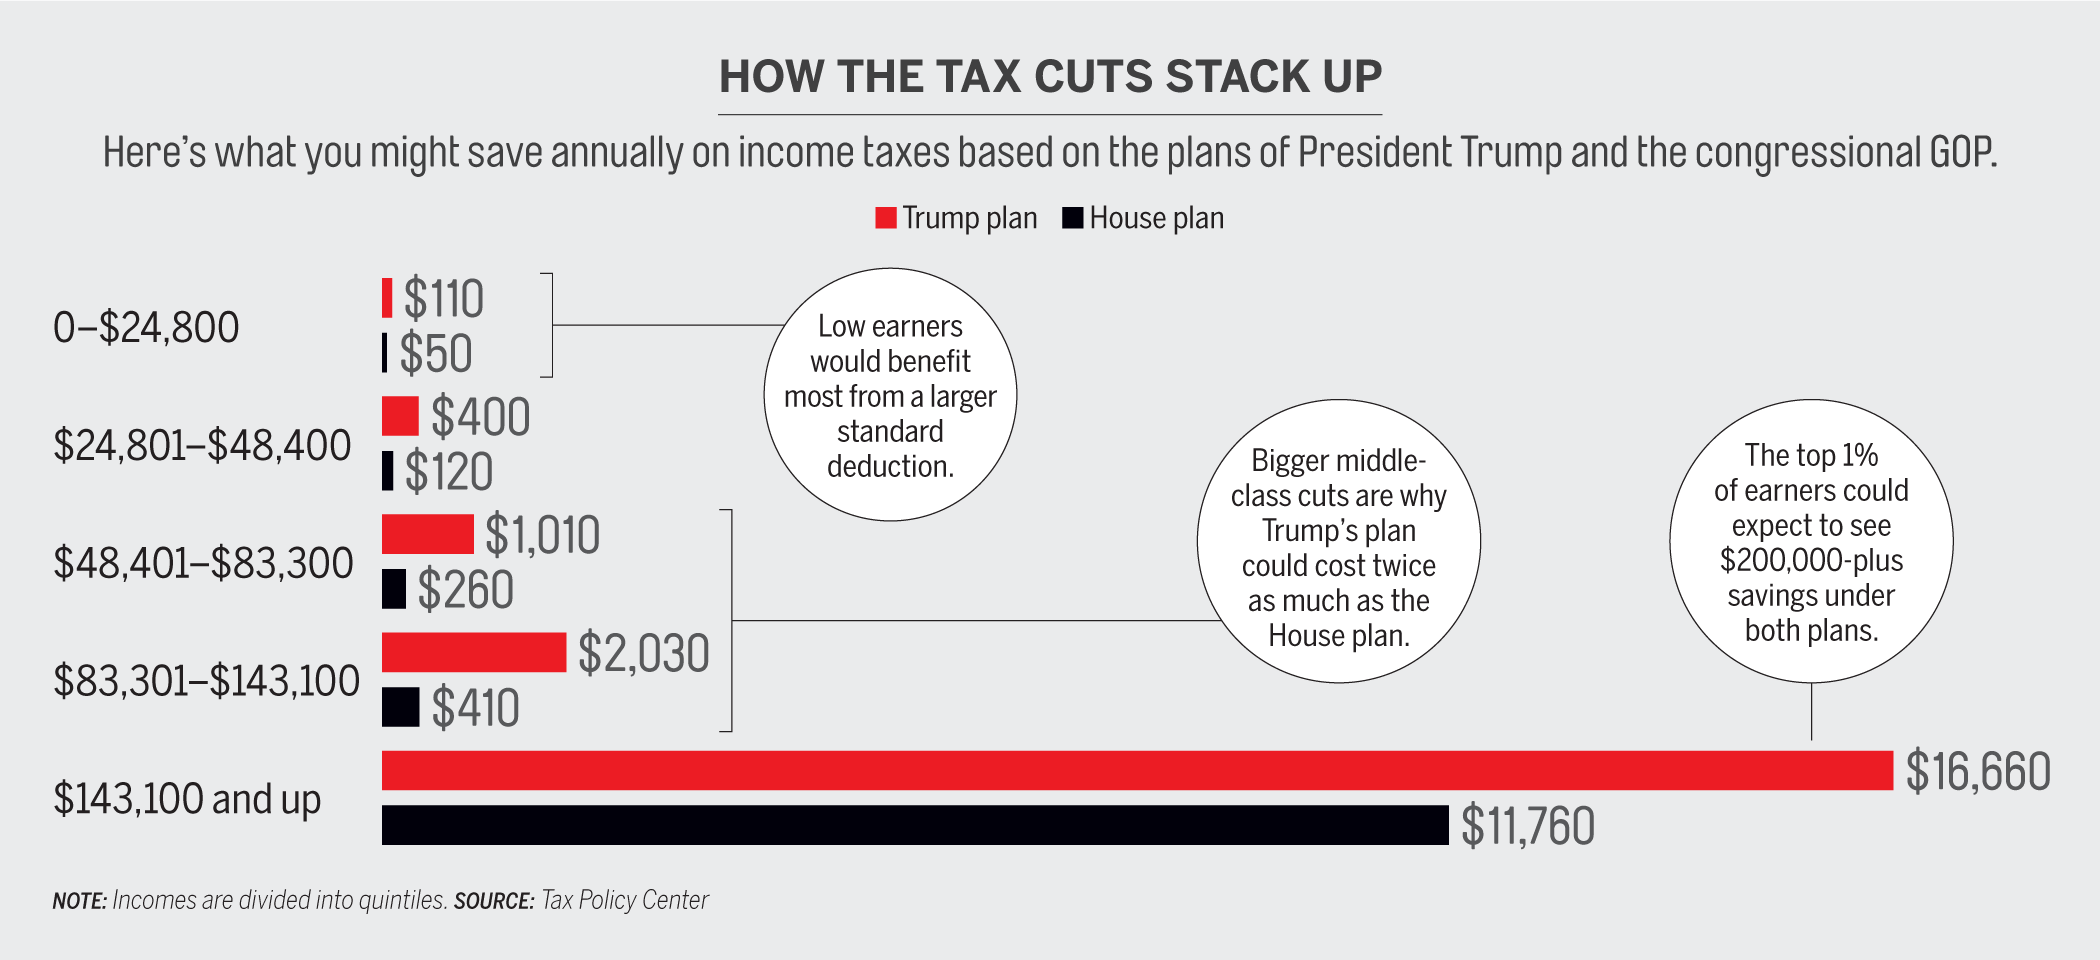 How the Tax Cuts Stack Up